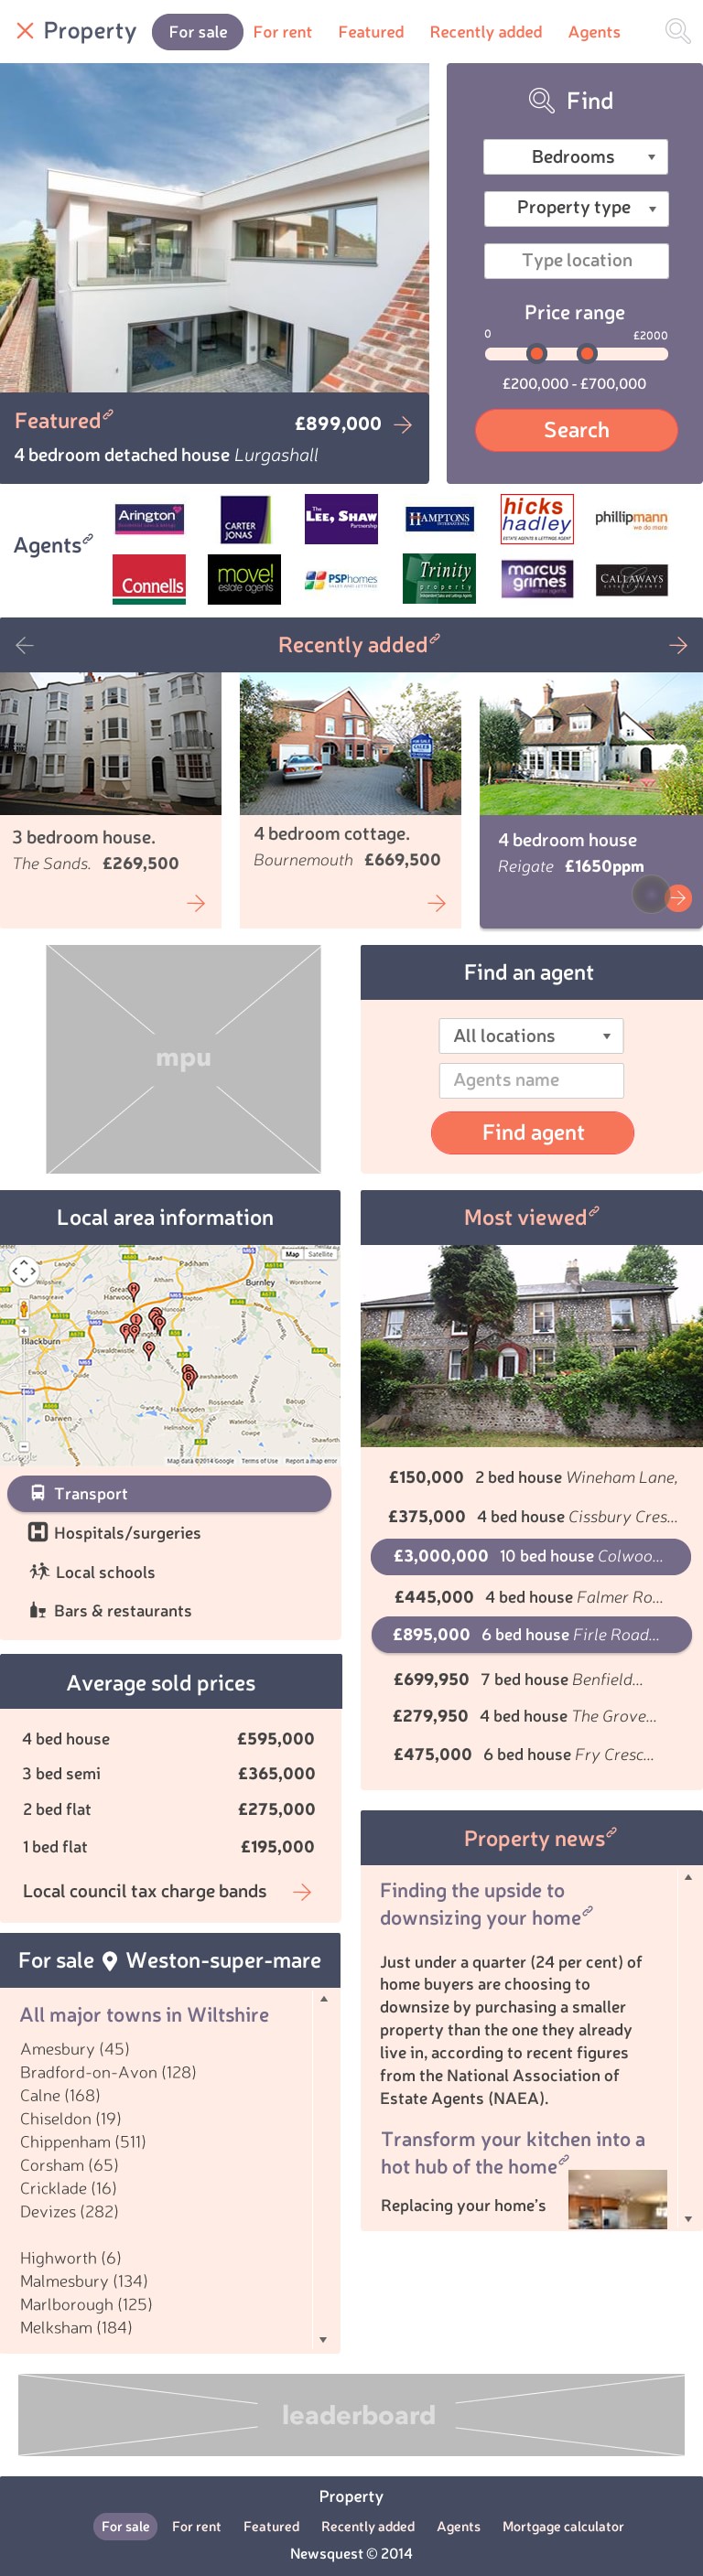 Property landing page tablet breakpoint